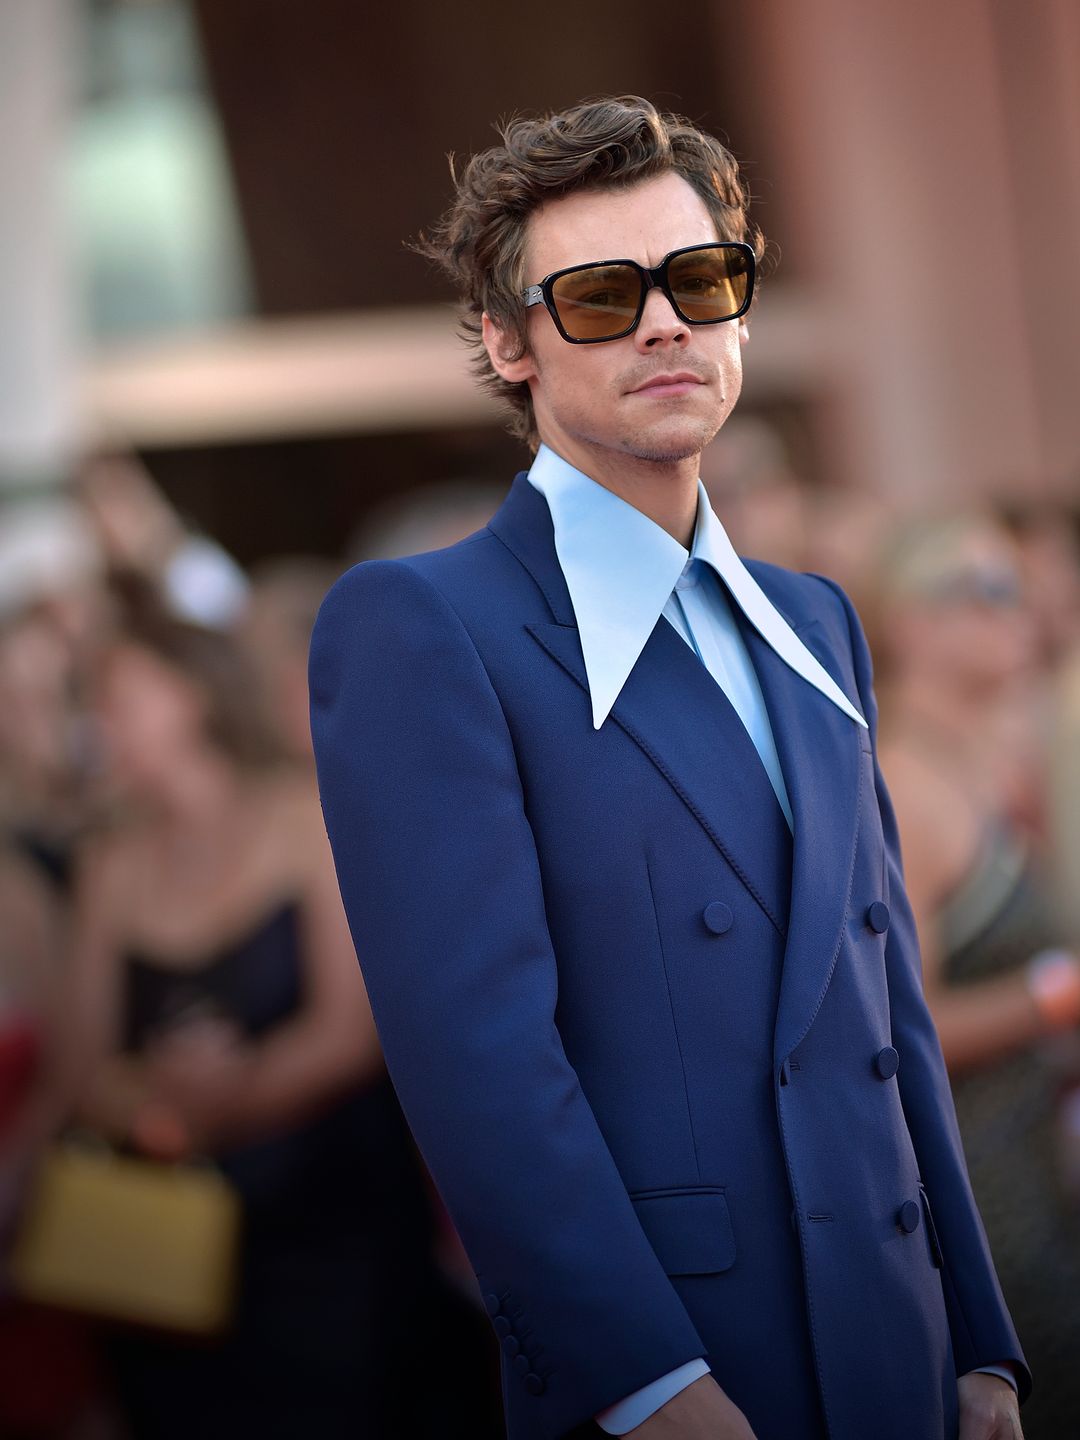 Harry Styles wears a navy blue suit and oversized collared shirt and sunglasses to the Venice International Film Festival 2022.